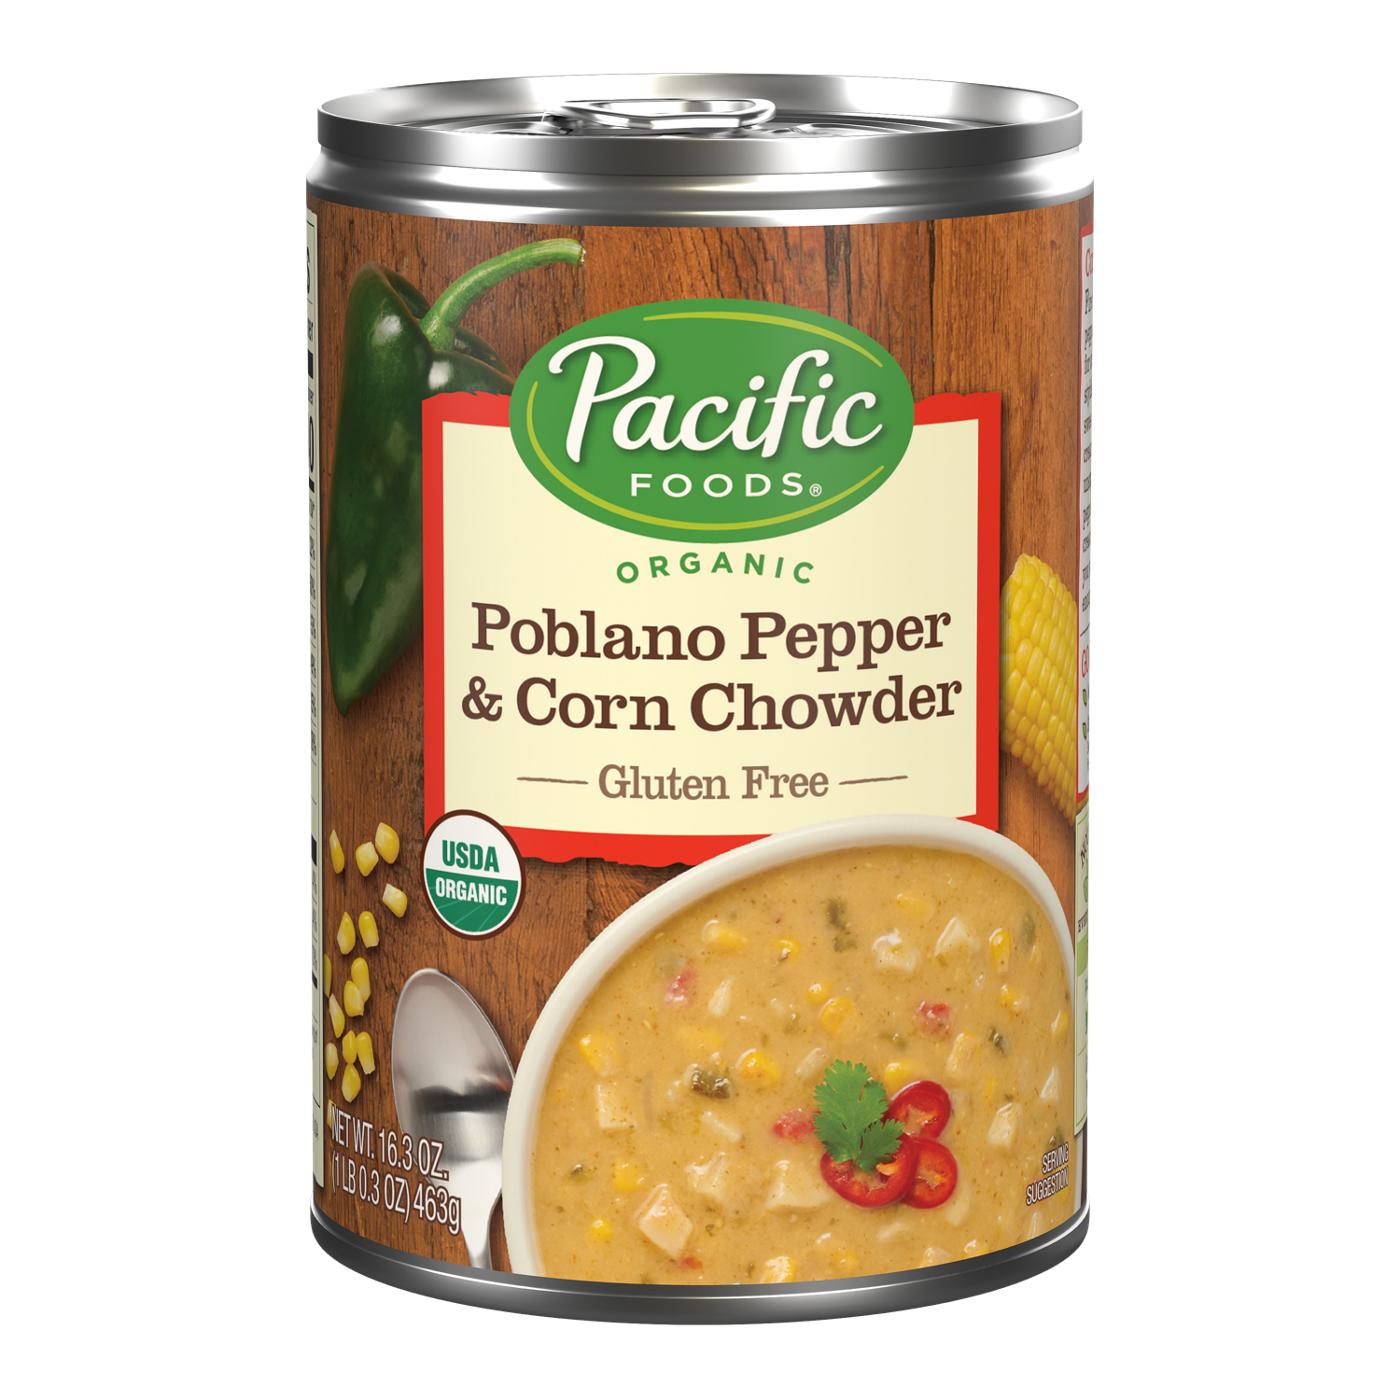 Pacific Foods Organic Poblano Pepper & Corn Chowder; image 1 of 4